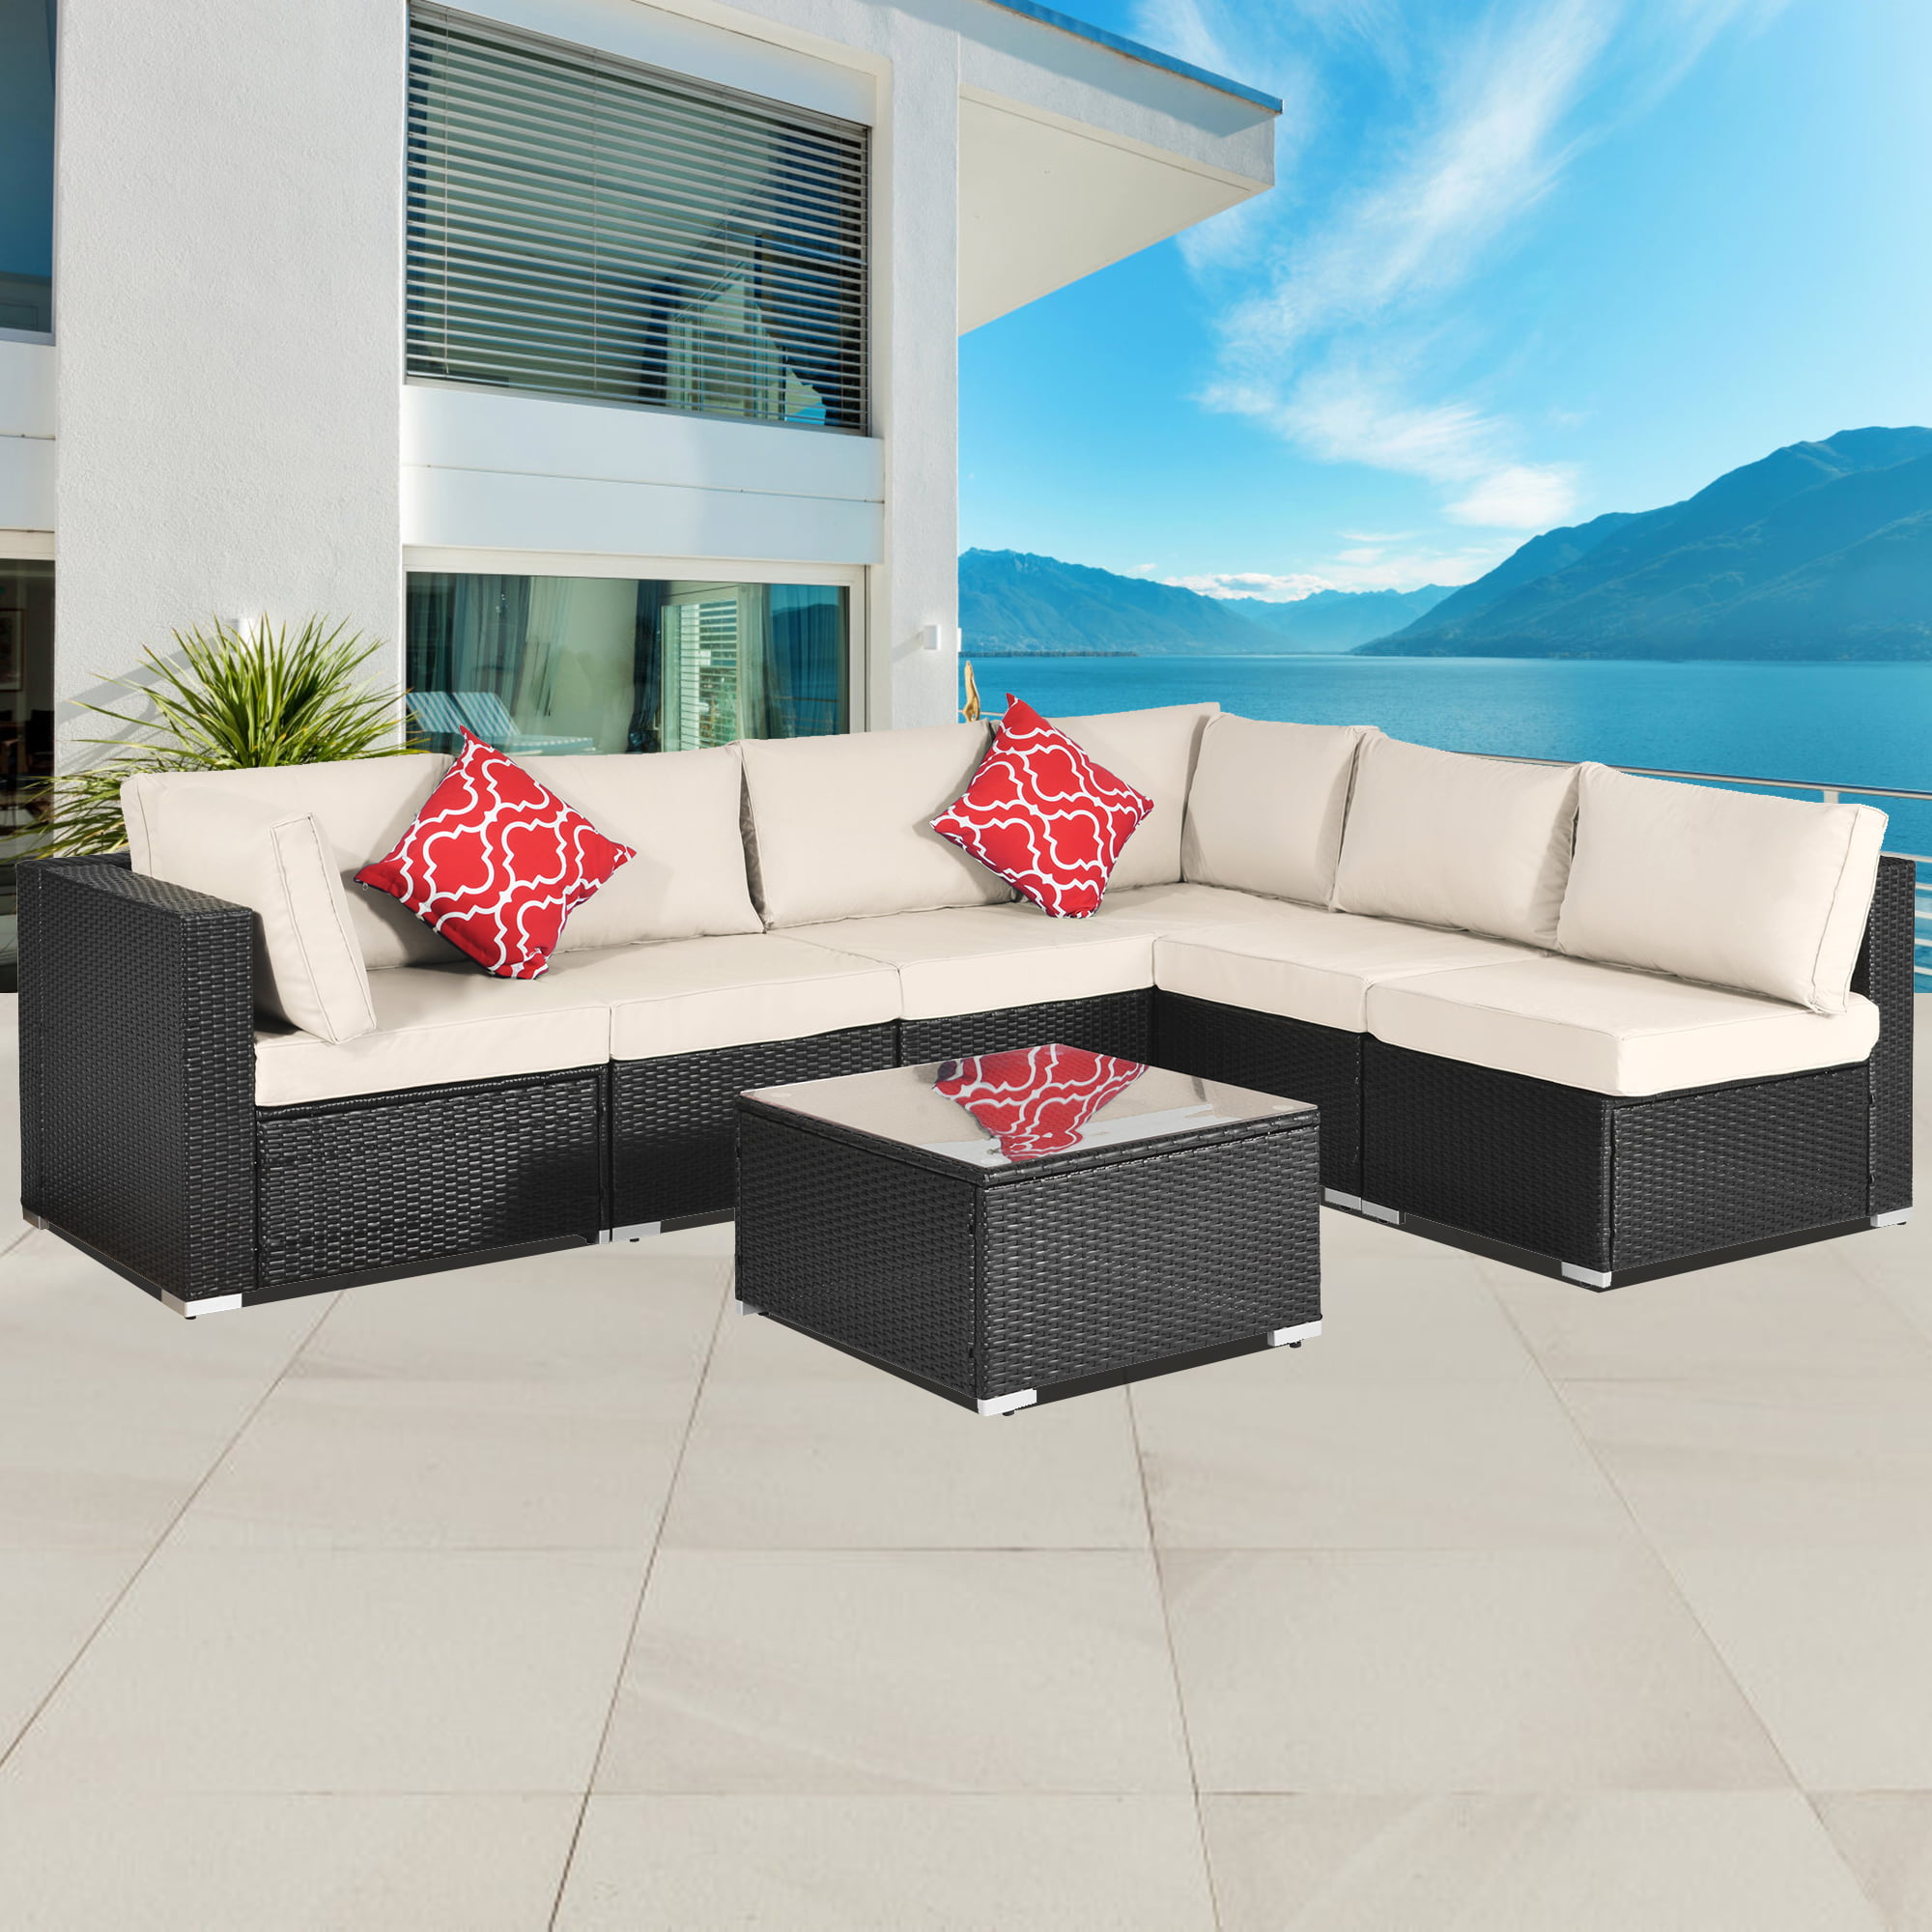 Details about   Outdoor Patio Furniture Couch Wicker Rattan Sofa Conversation Sectional Sets New 